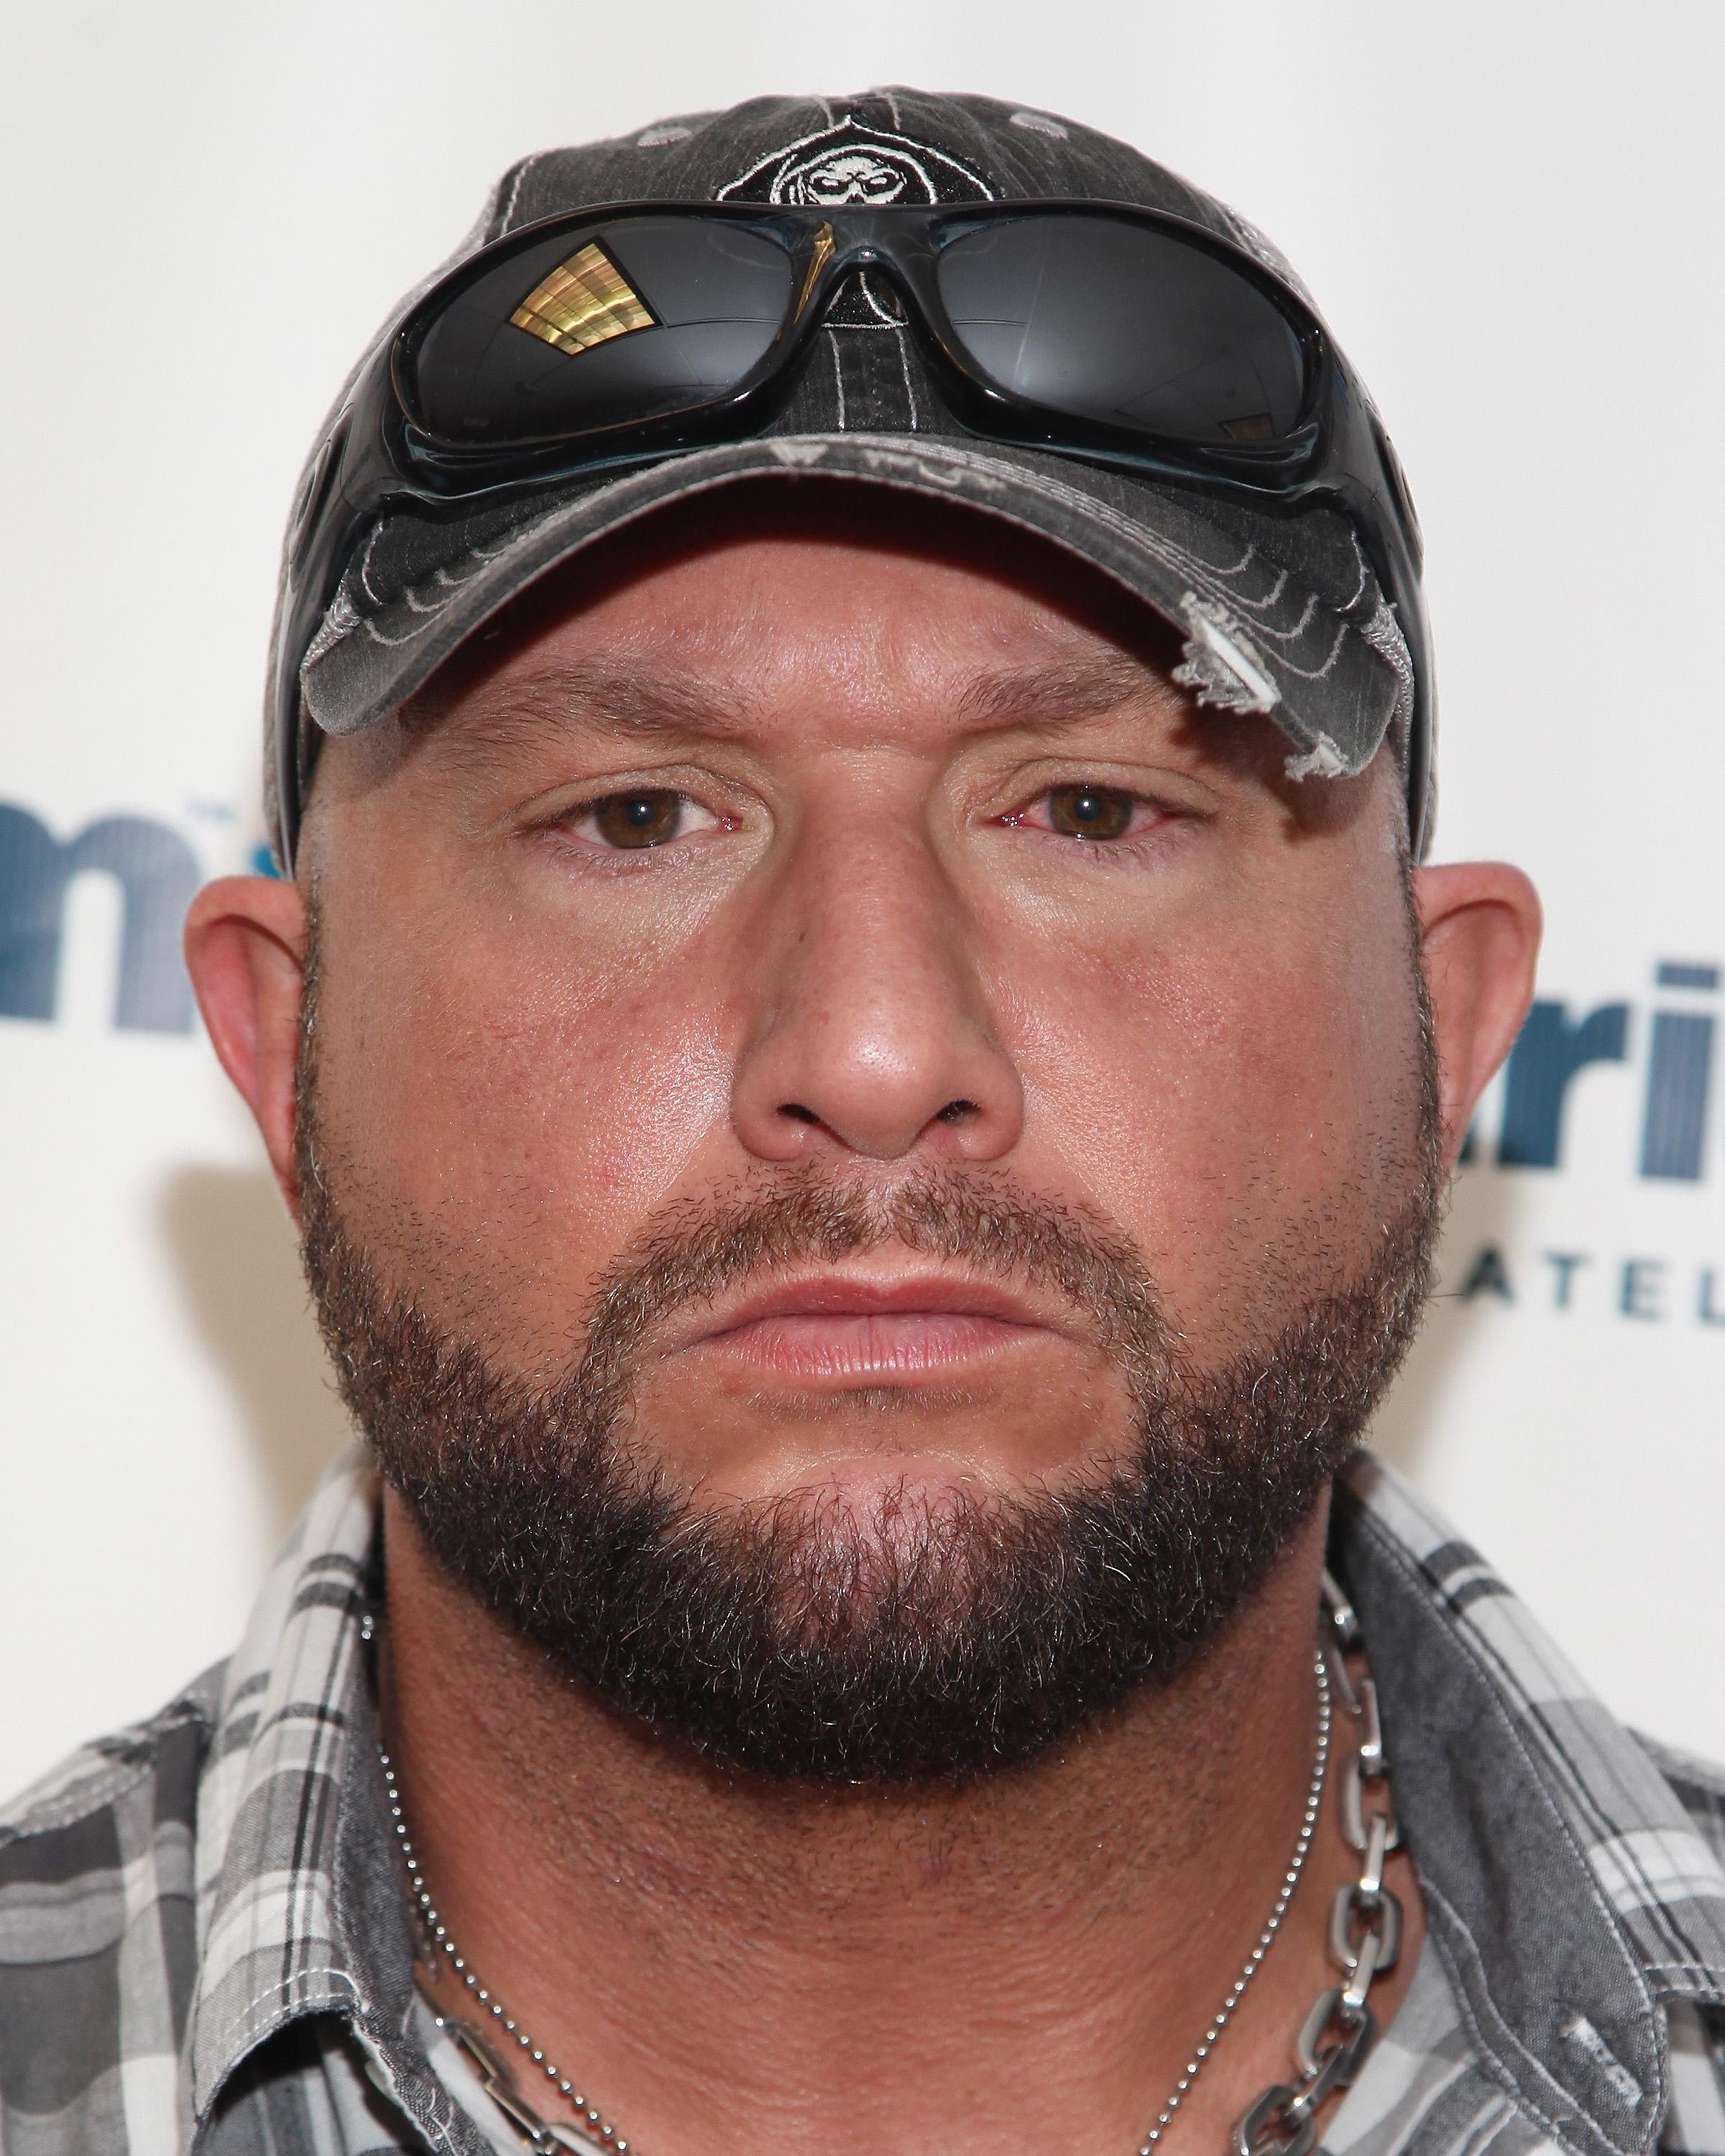 dillon fish recommends bubba ray dudley porn pic